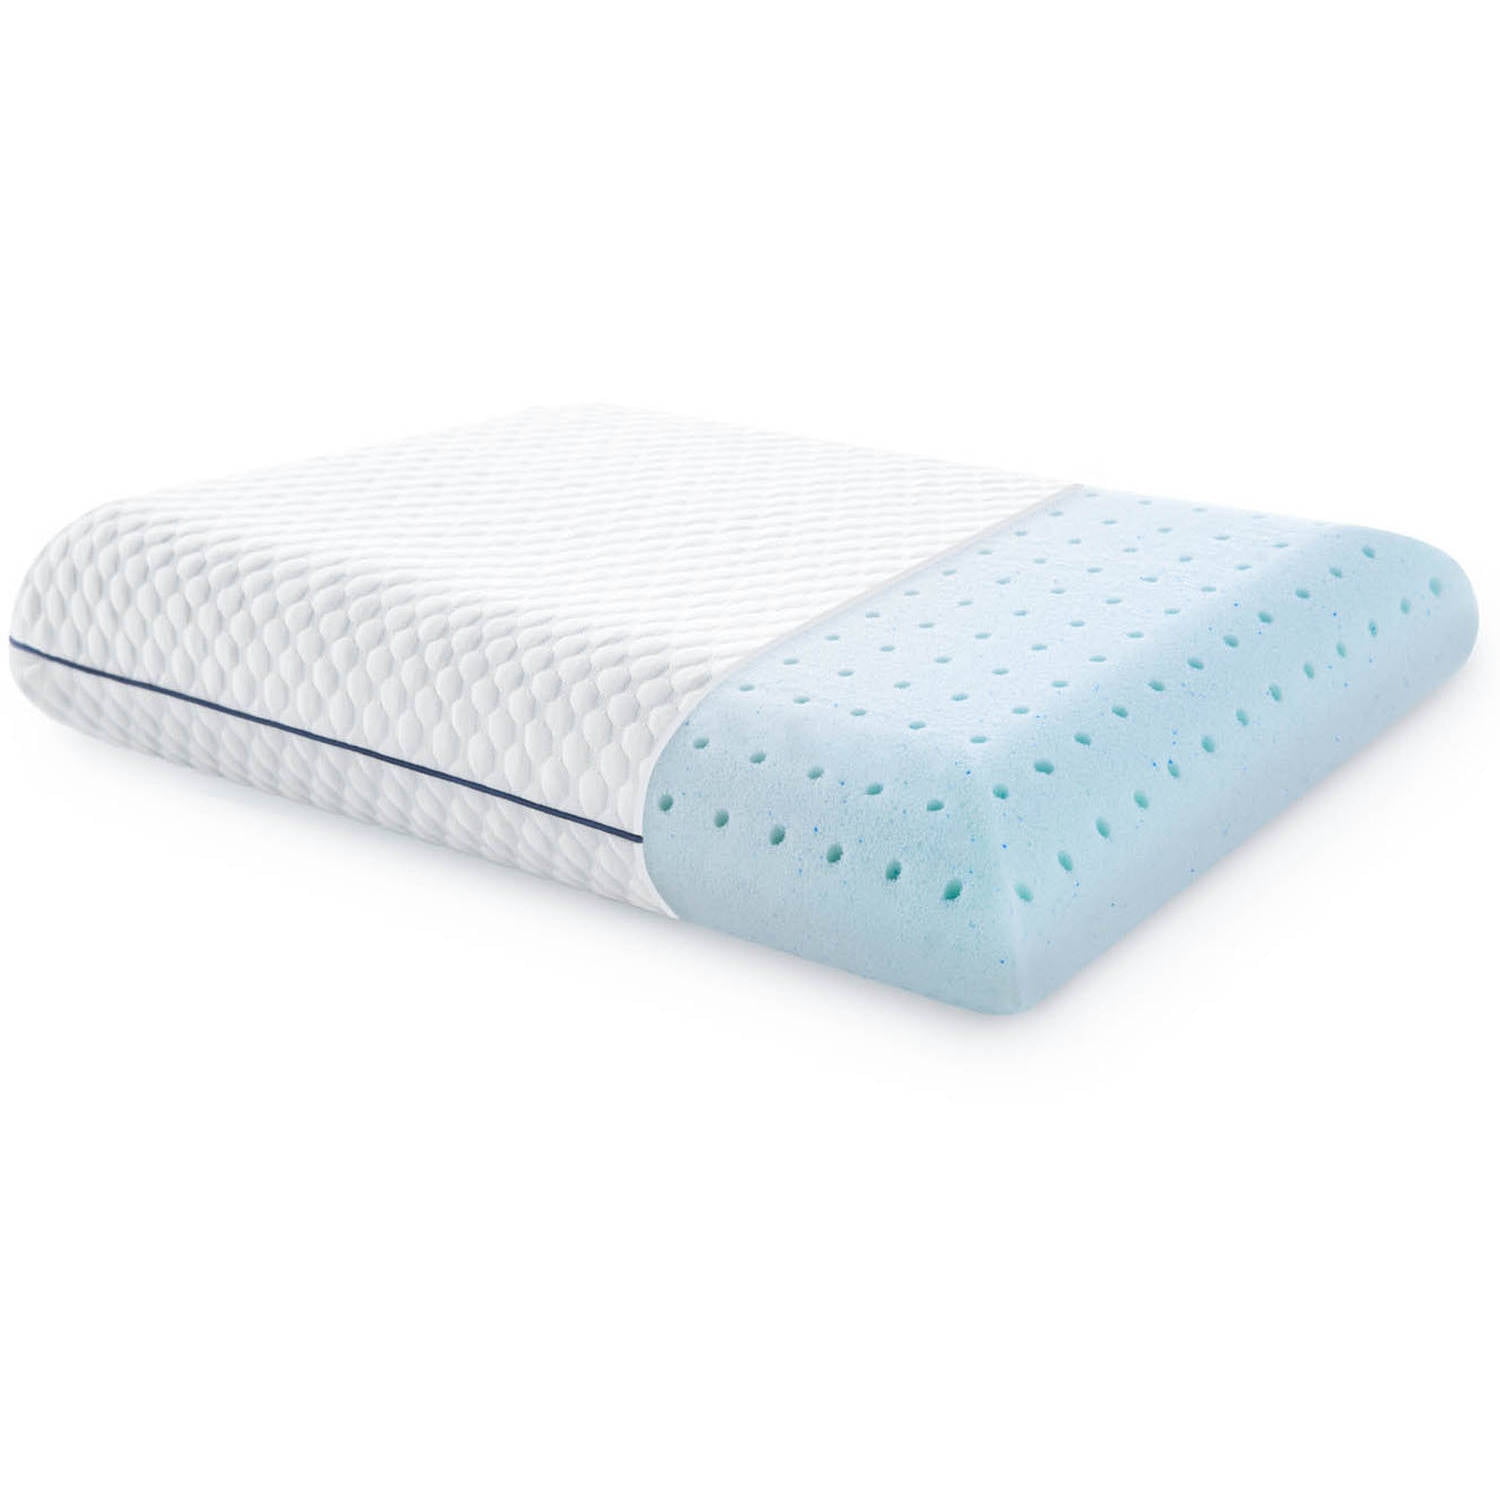 Washable Cover Standard Size Details about   Weekender Ventilated Gel Memory Foam Pillow 